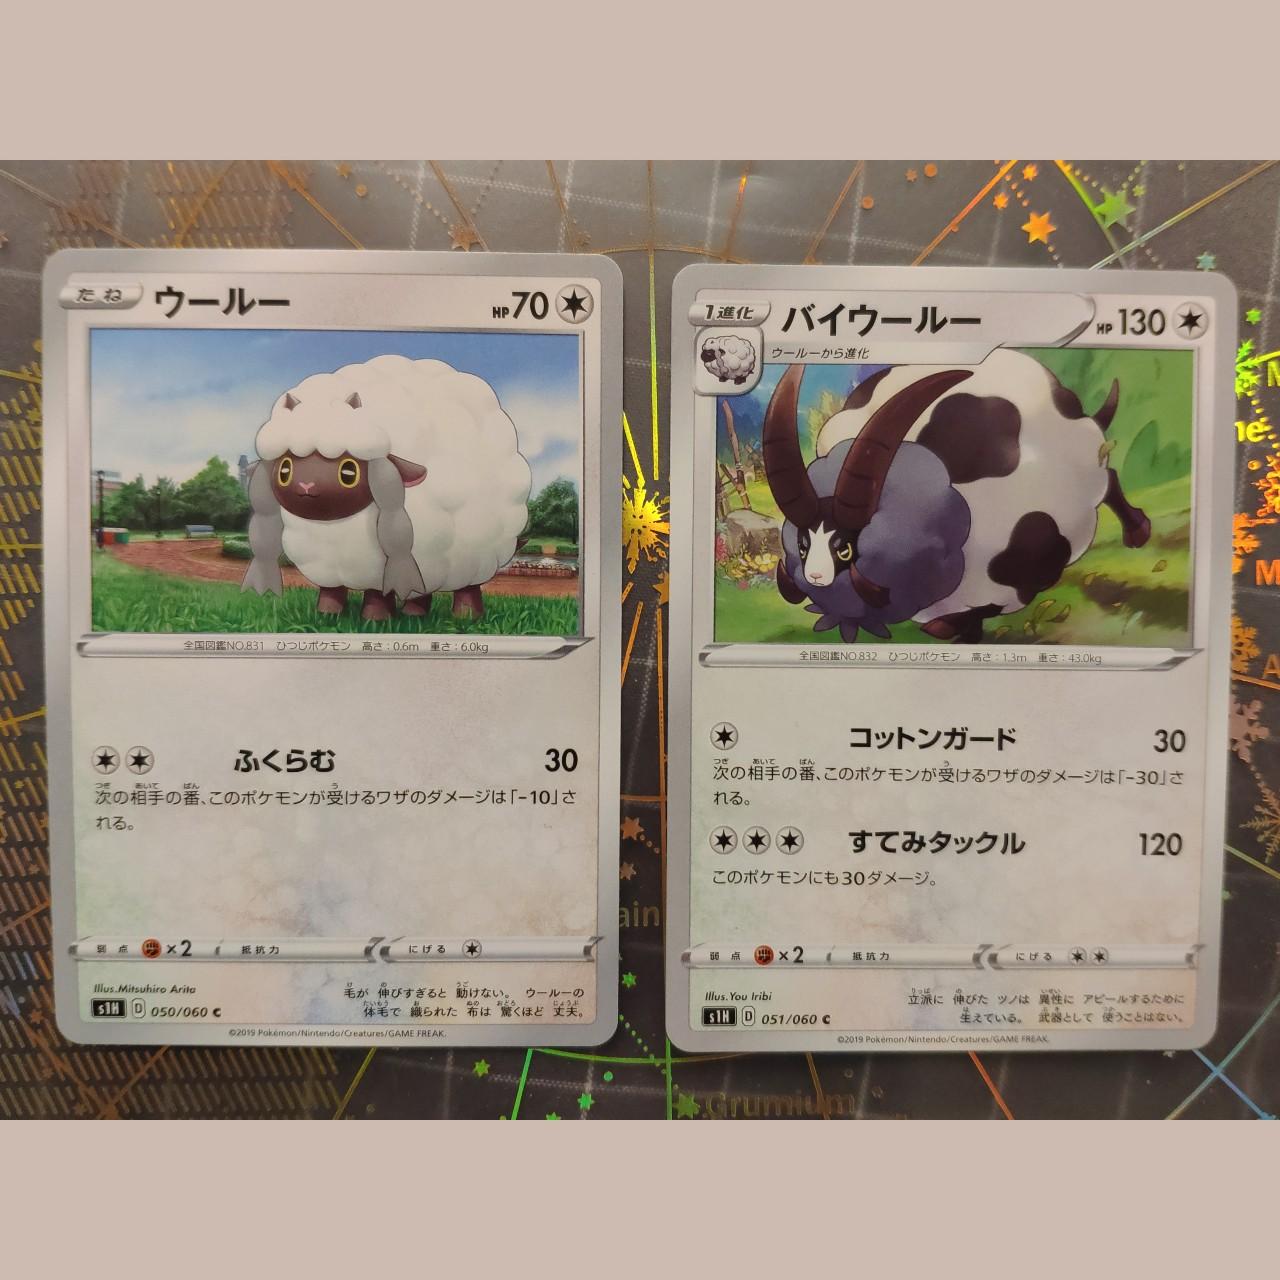 Wooloo And Dubwool In The Newest Japanese Pokemon Depop